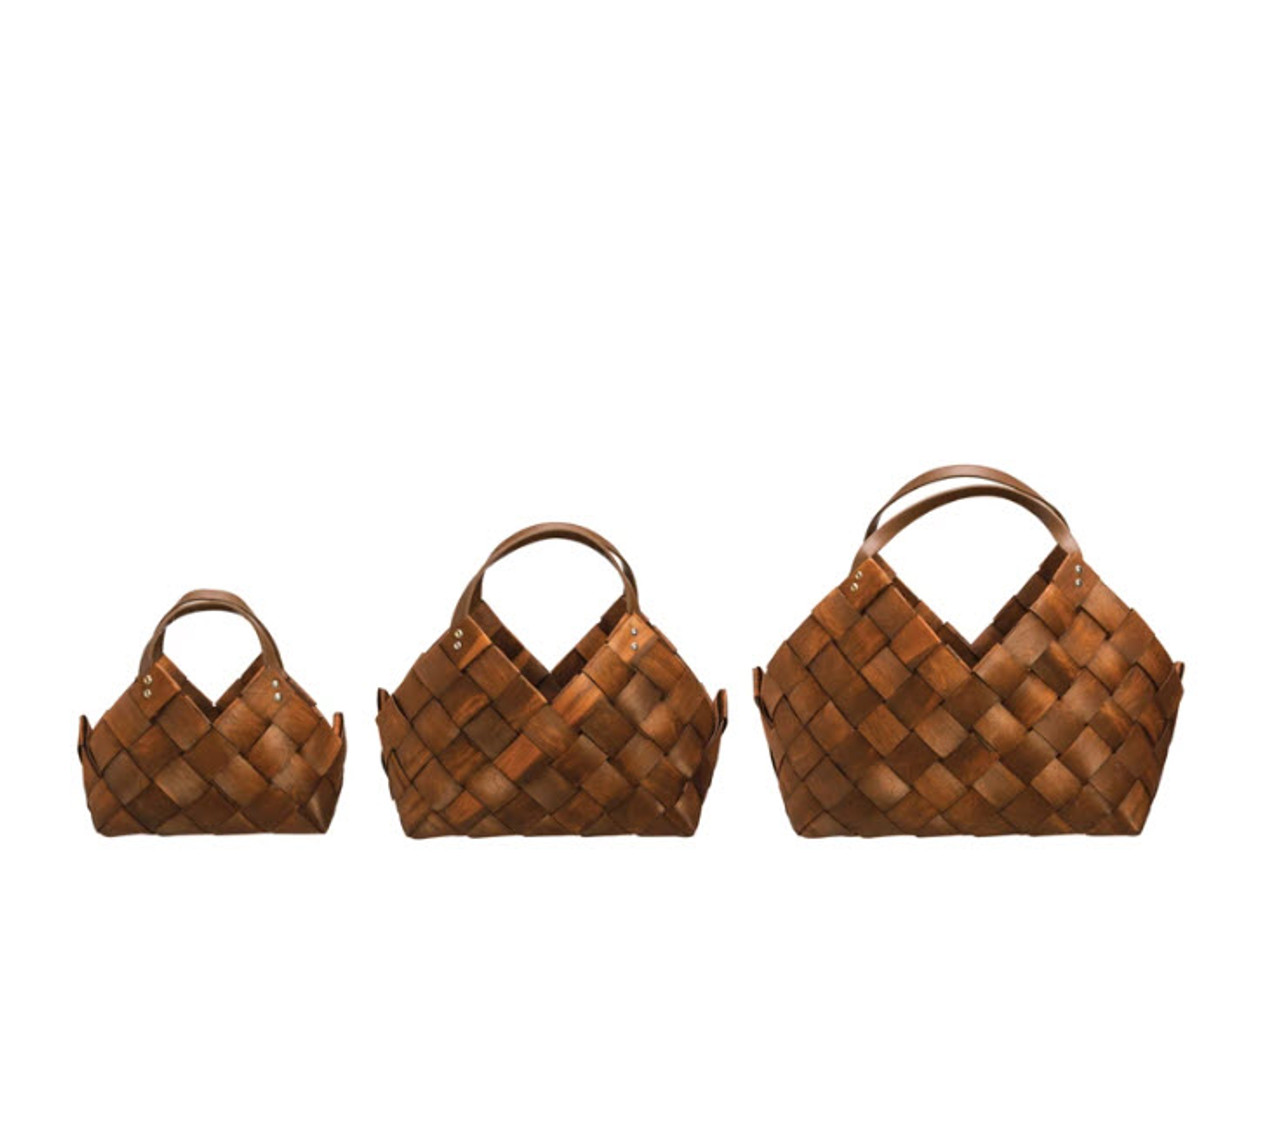 Handwoven Basket Tote Open Weave with Brown Leather Handles – CÔTE